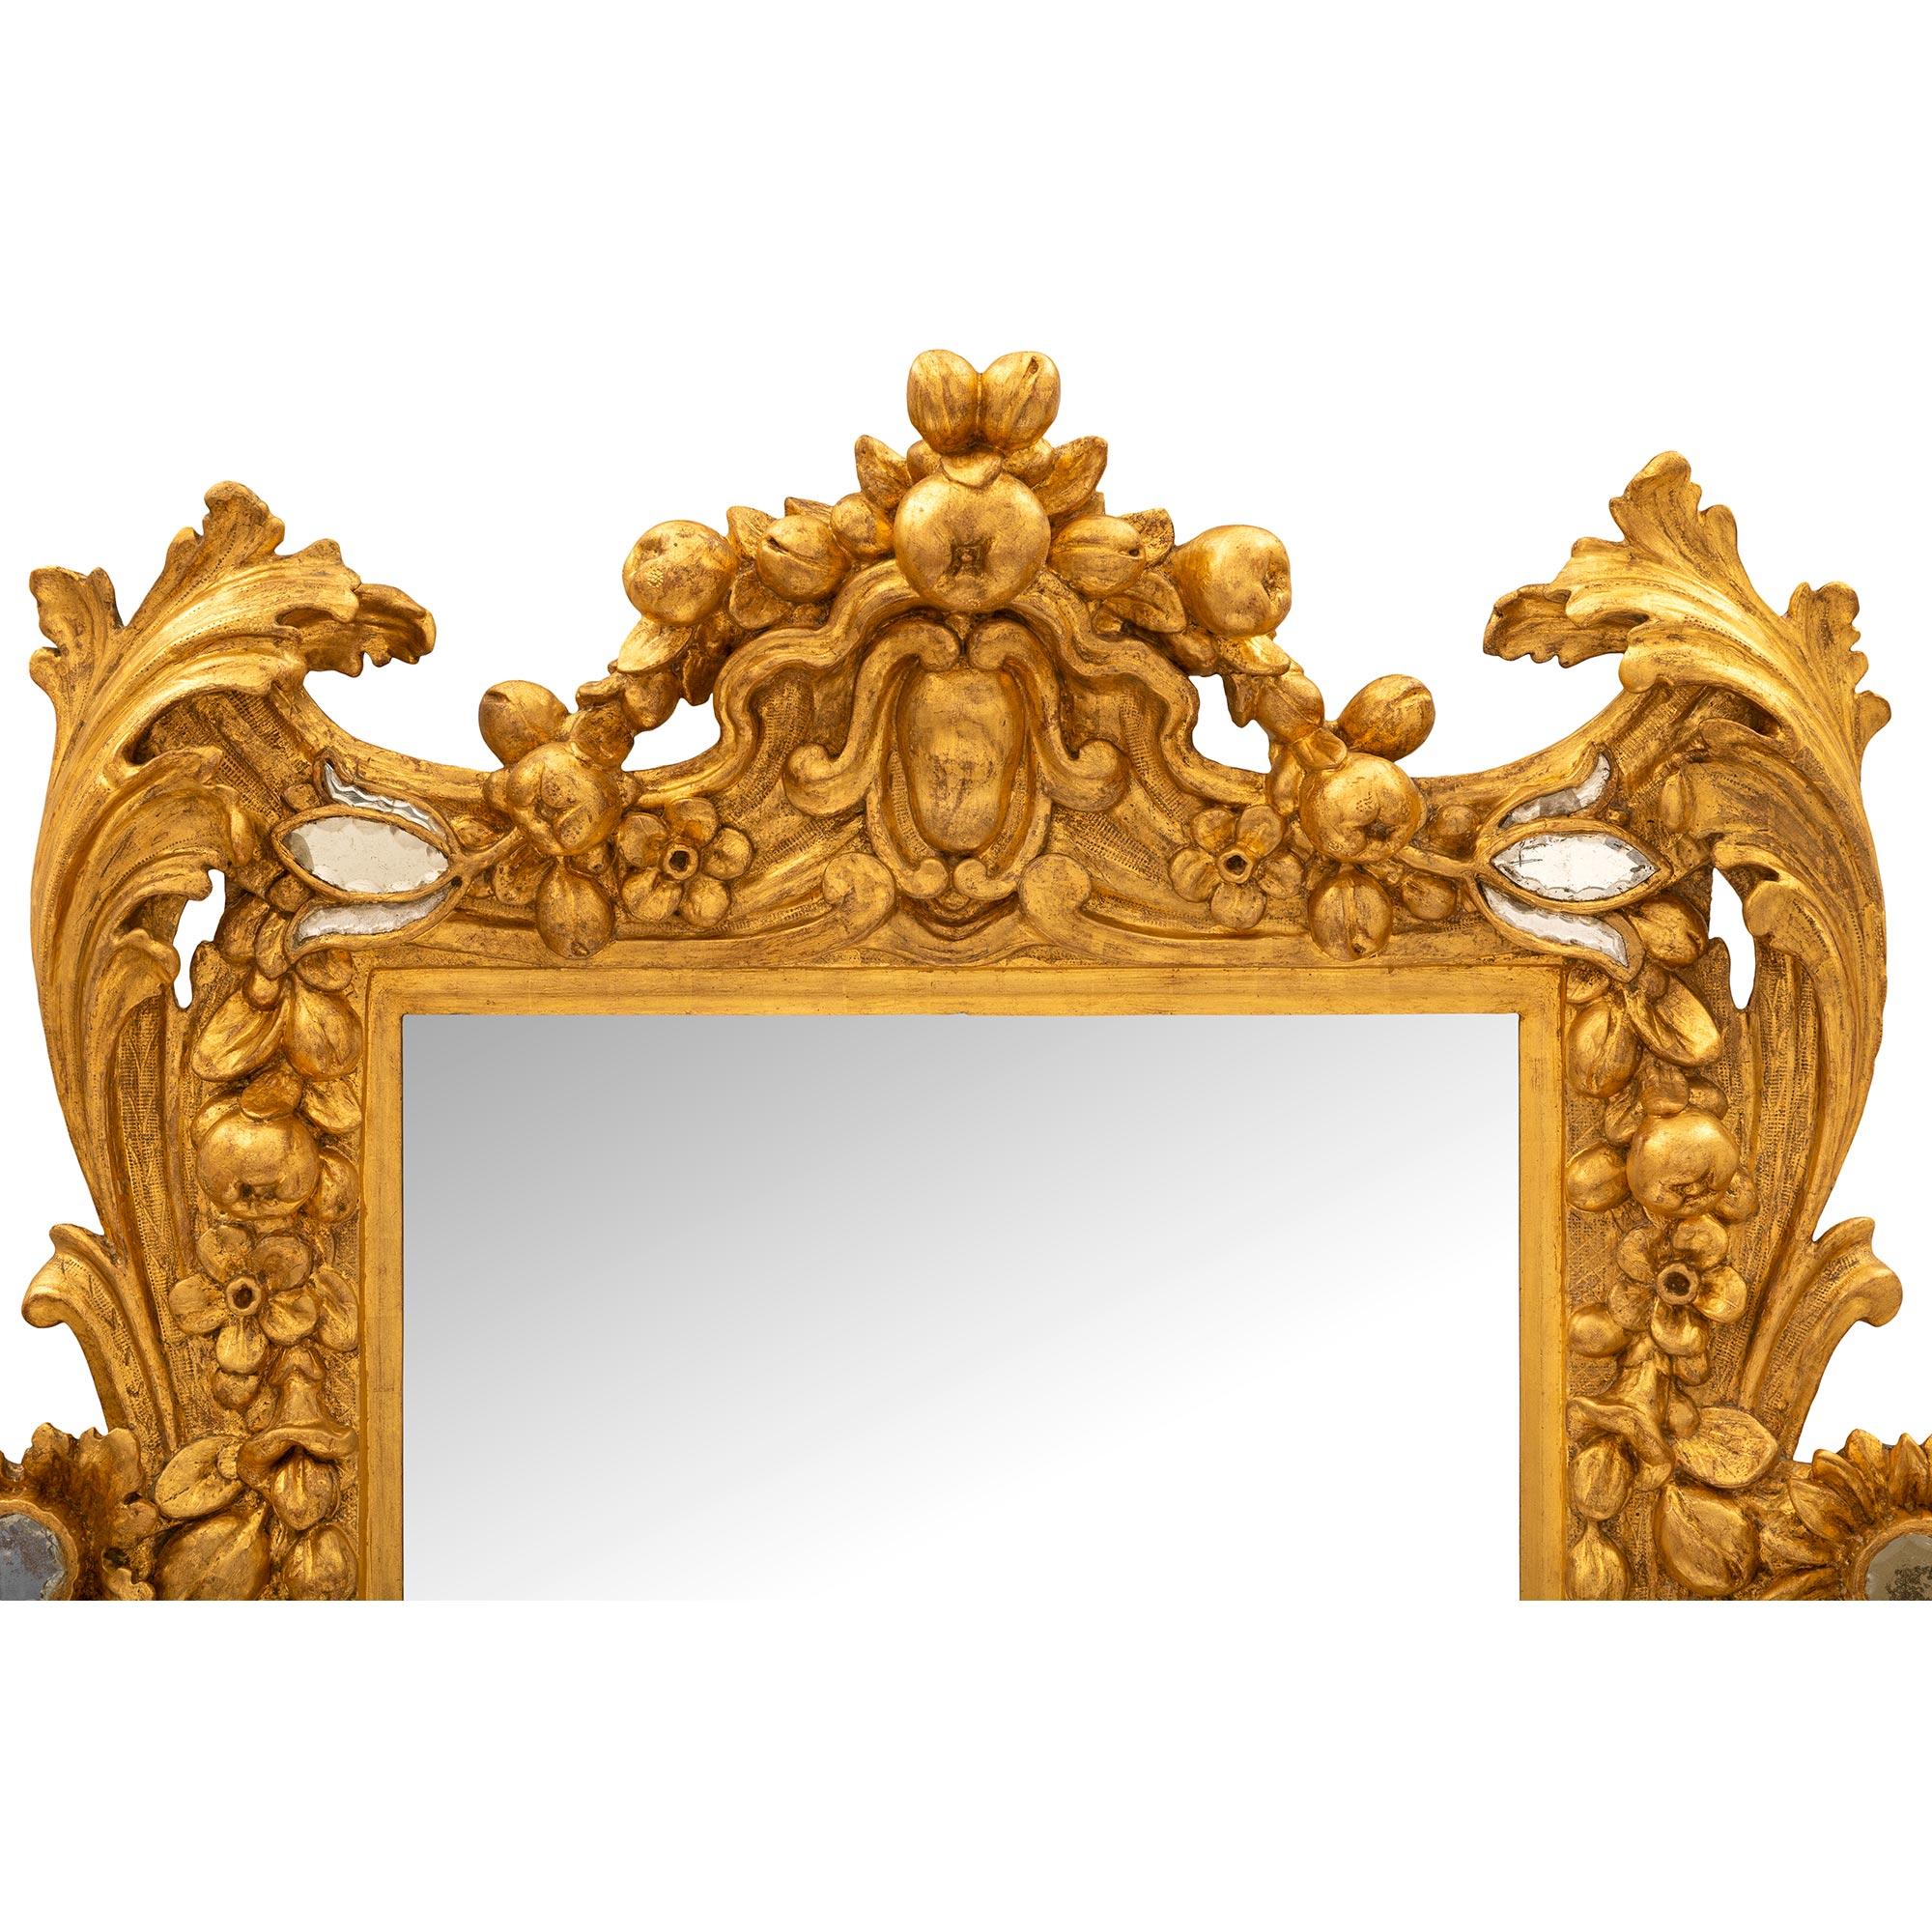 A stunning Italian early 18th century Baroque period giltwood and cut glass mirror. The central rectangular mirror plate is set within a fine mottled border with exceptional finely detailed carvings extending throughout the frame. At the base is a